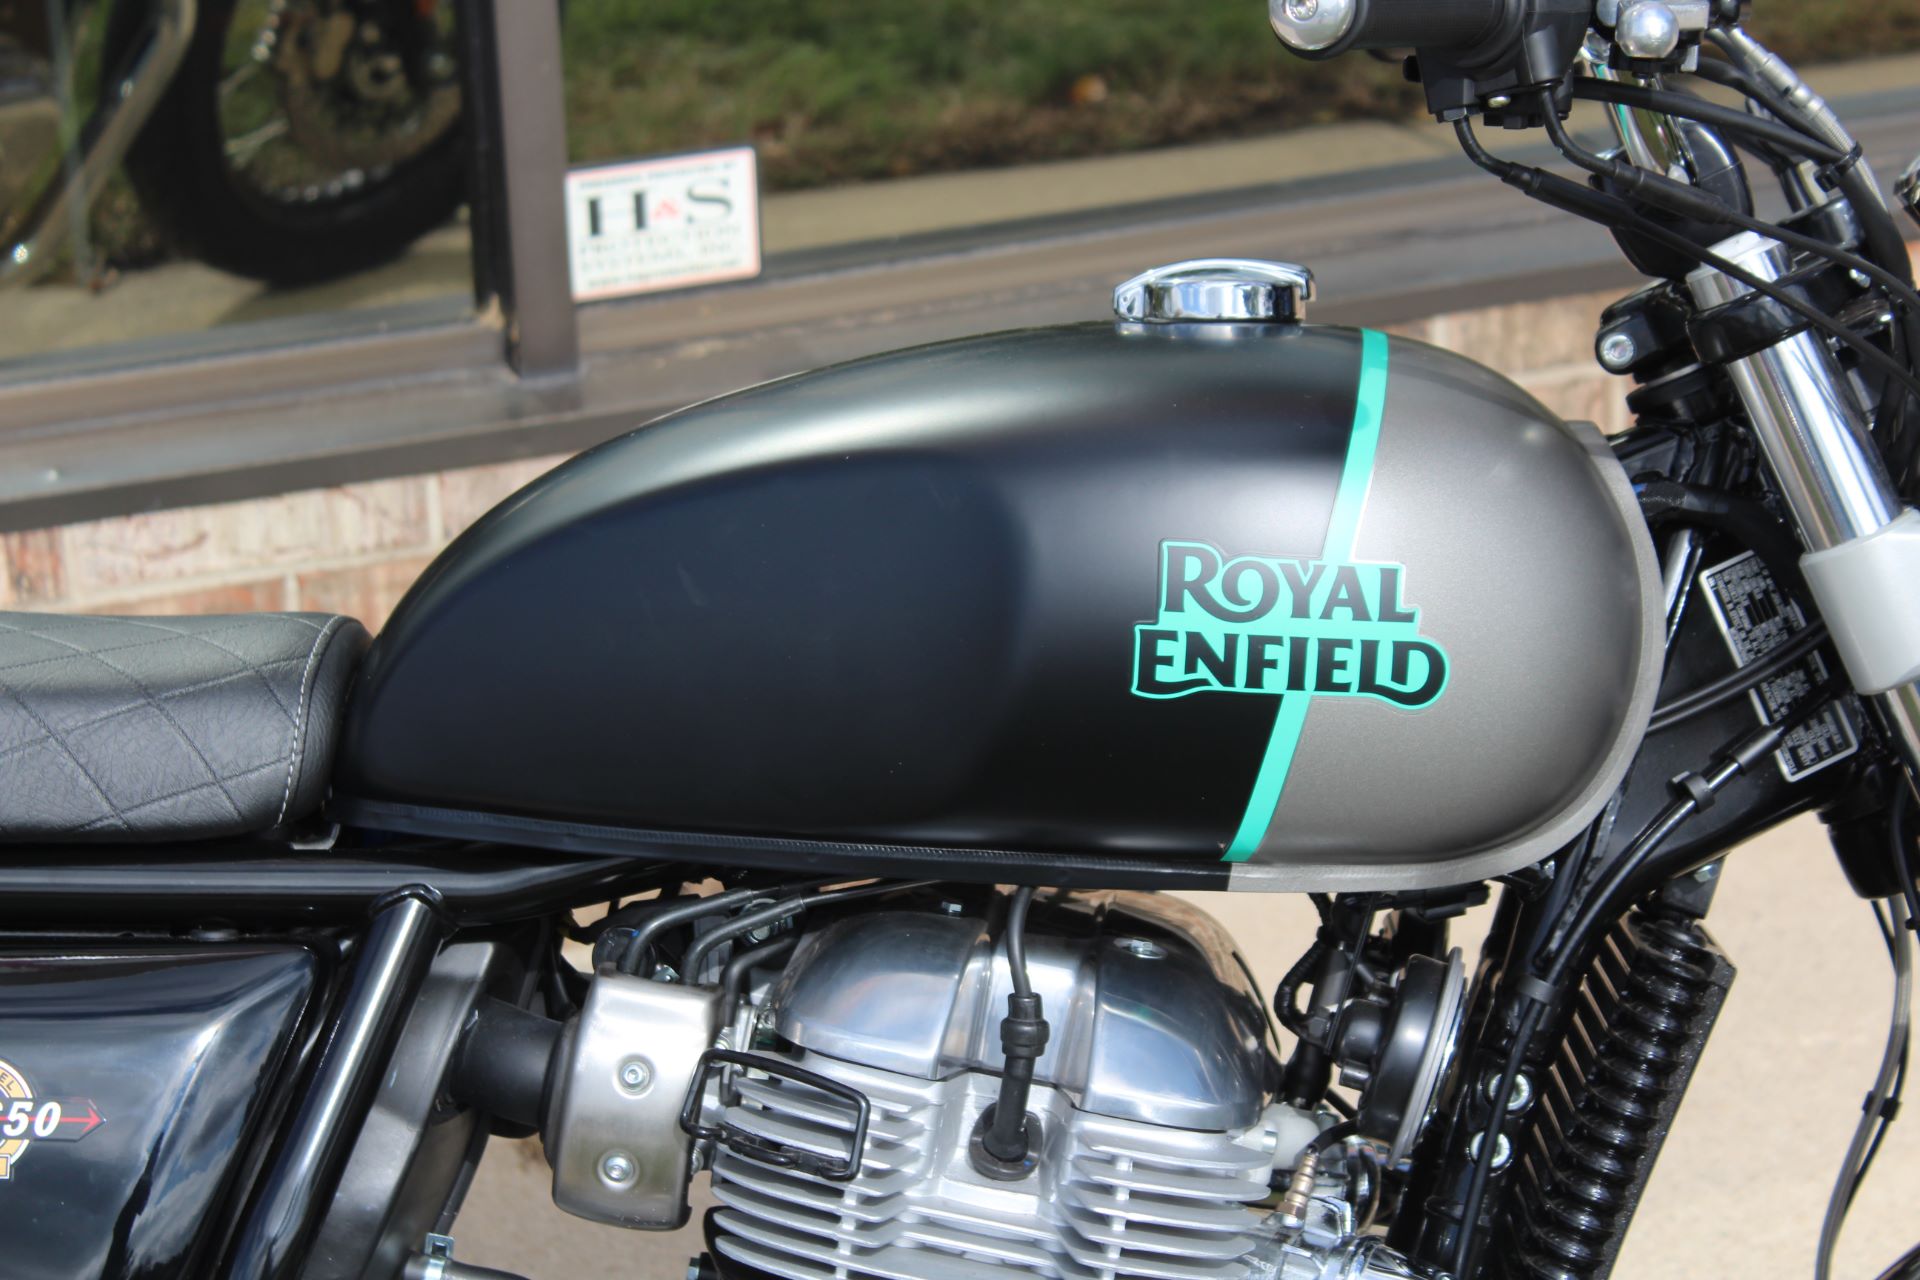 2022 Royal Enfield INT650 in West Allis, Wisconsin - Photo 3